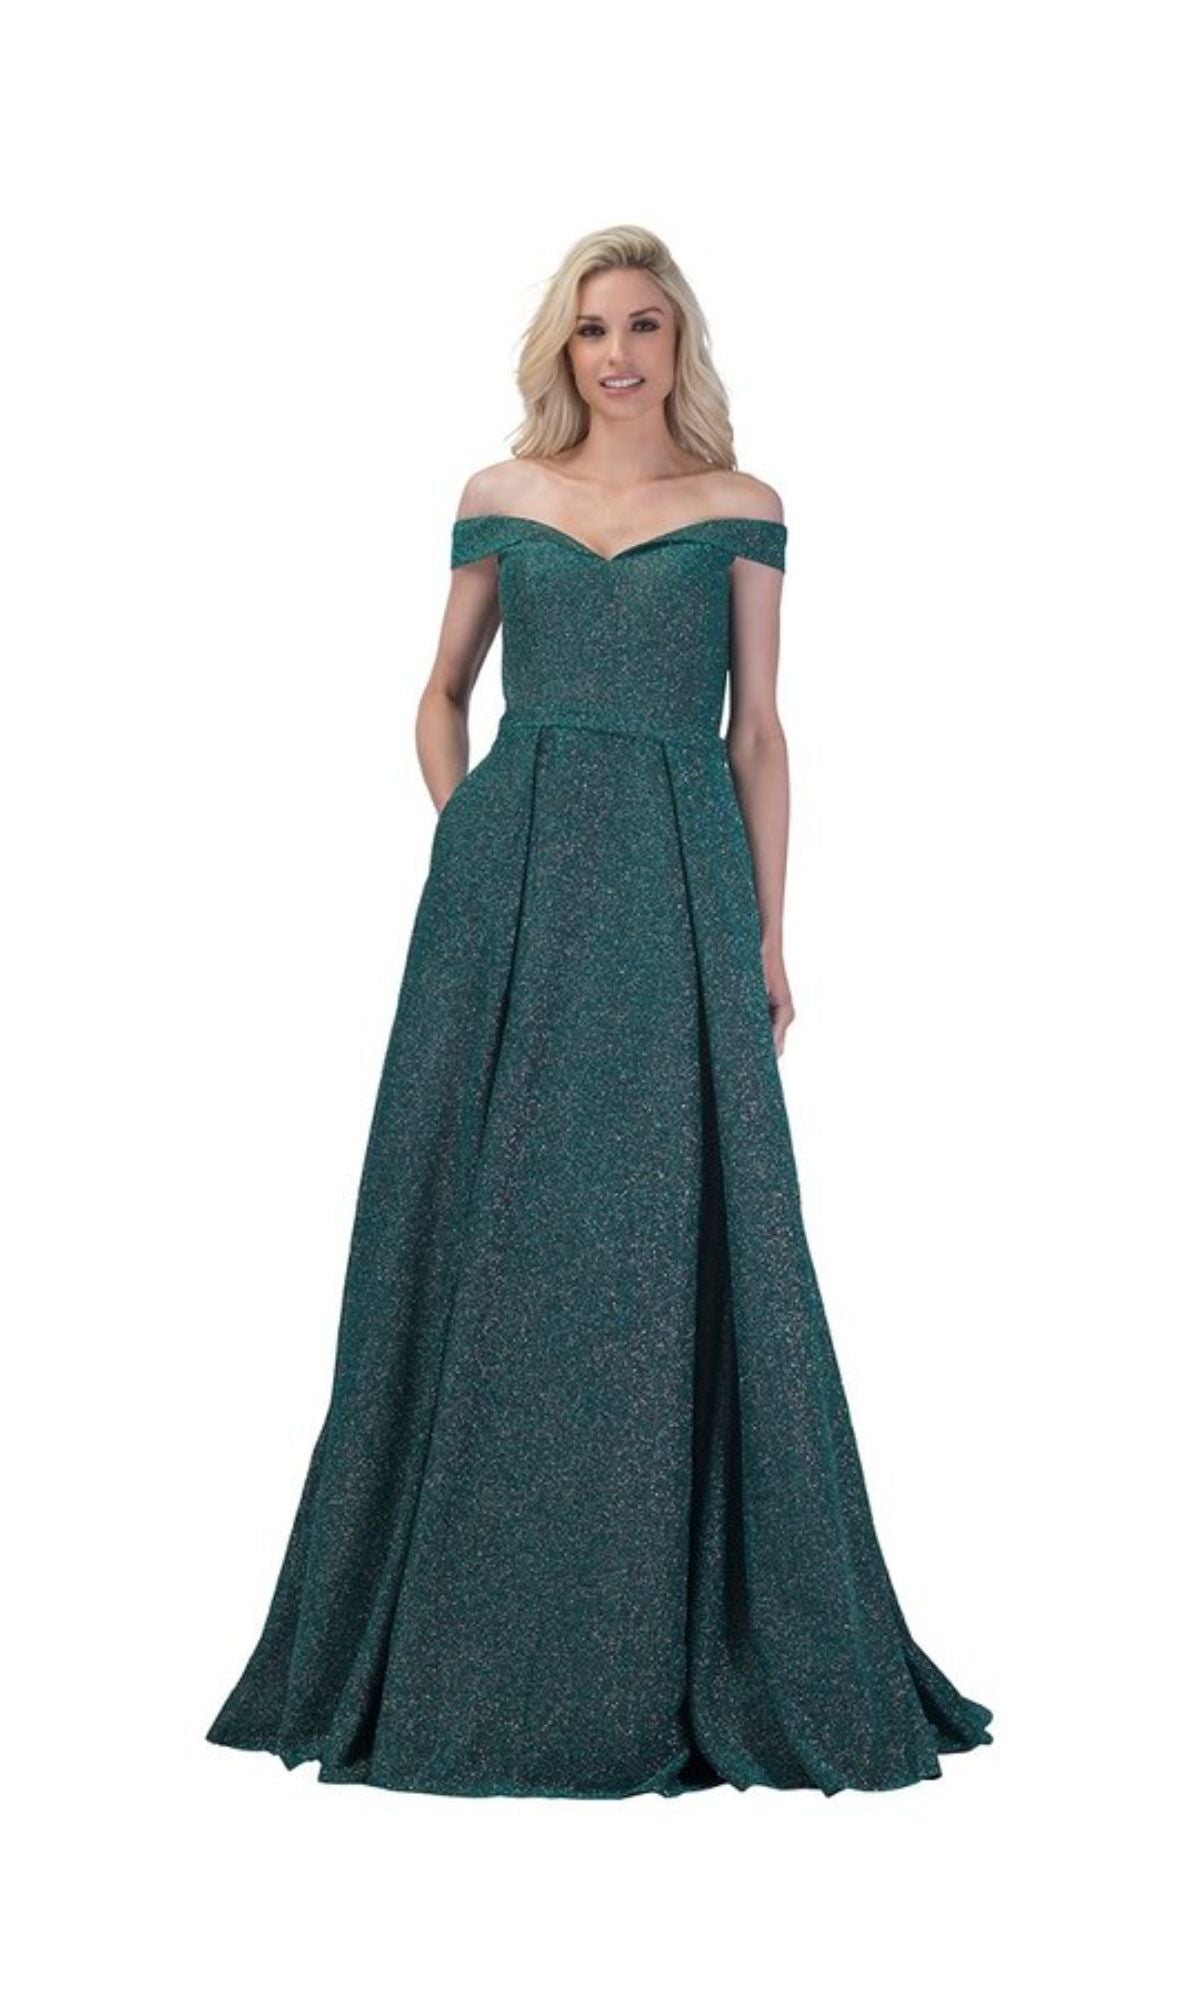 Long Prom Dress BT9025 by Chicas